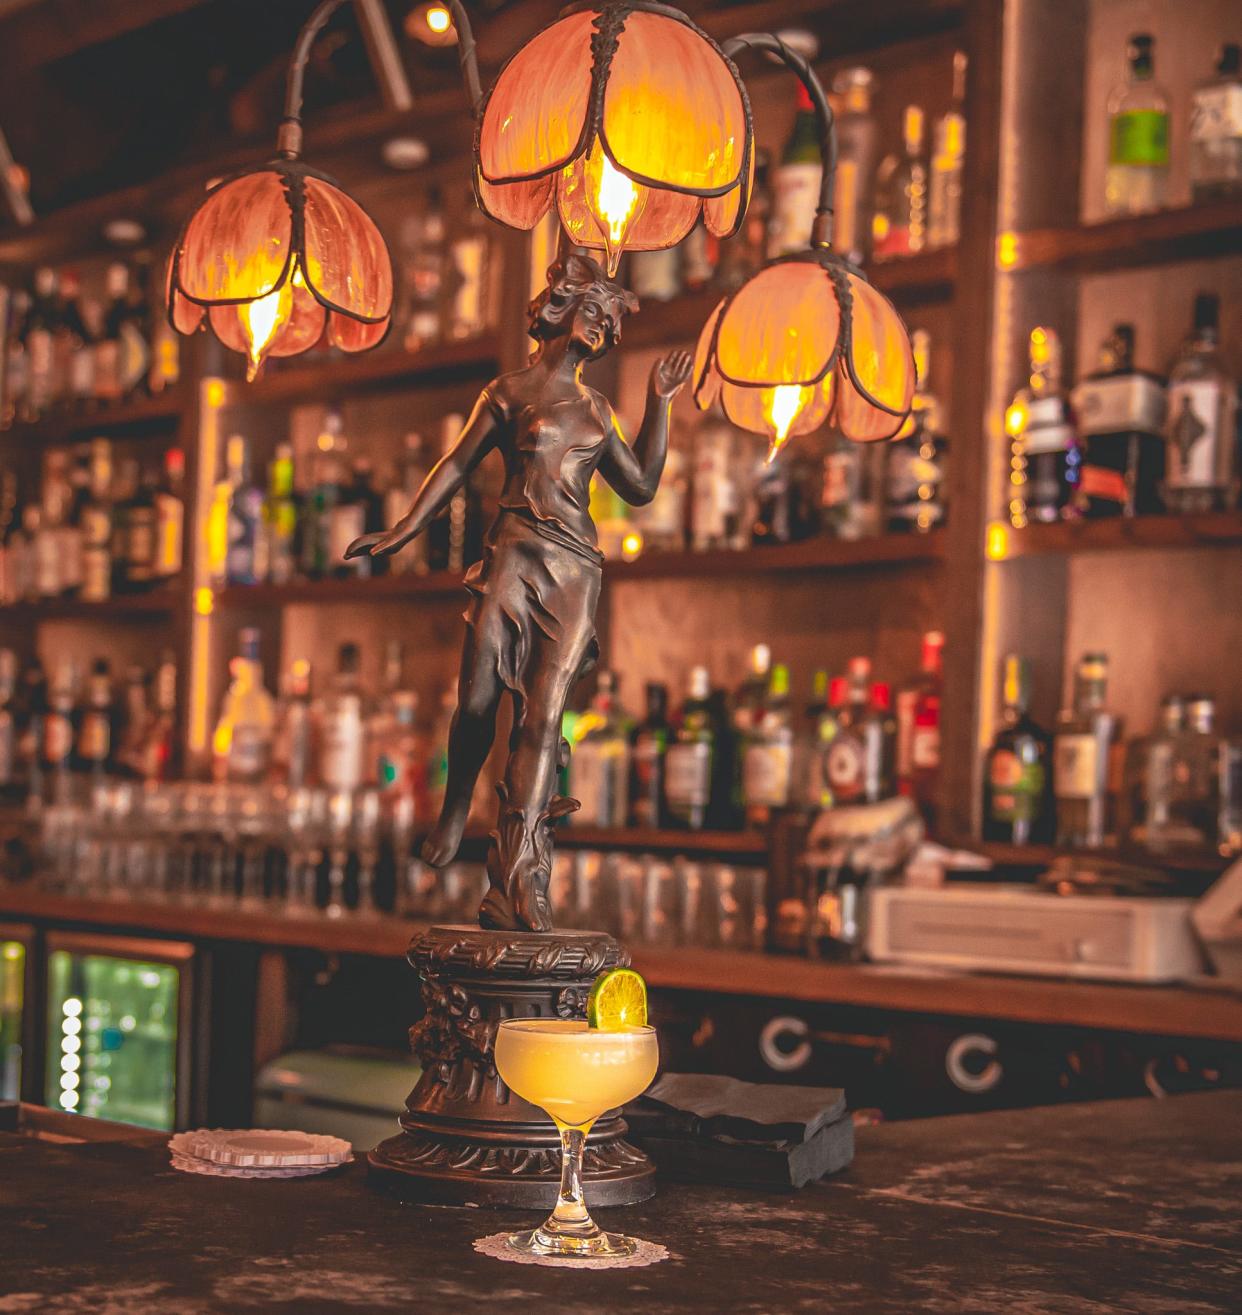 Art Nouveau is the inspiration for the design of Darling's gin-forward cocktail bar in Louisville.